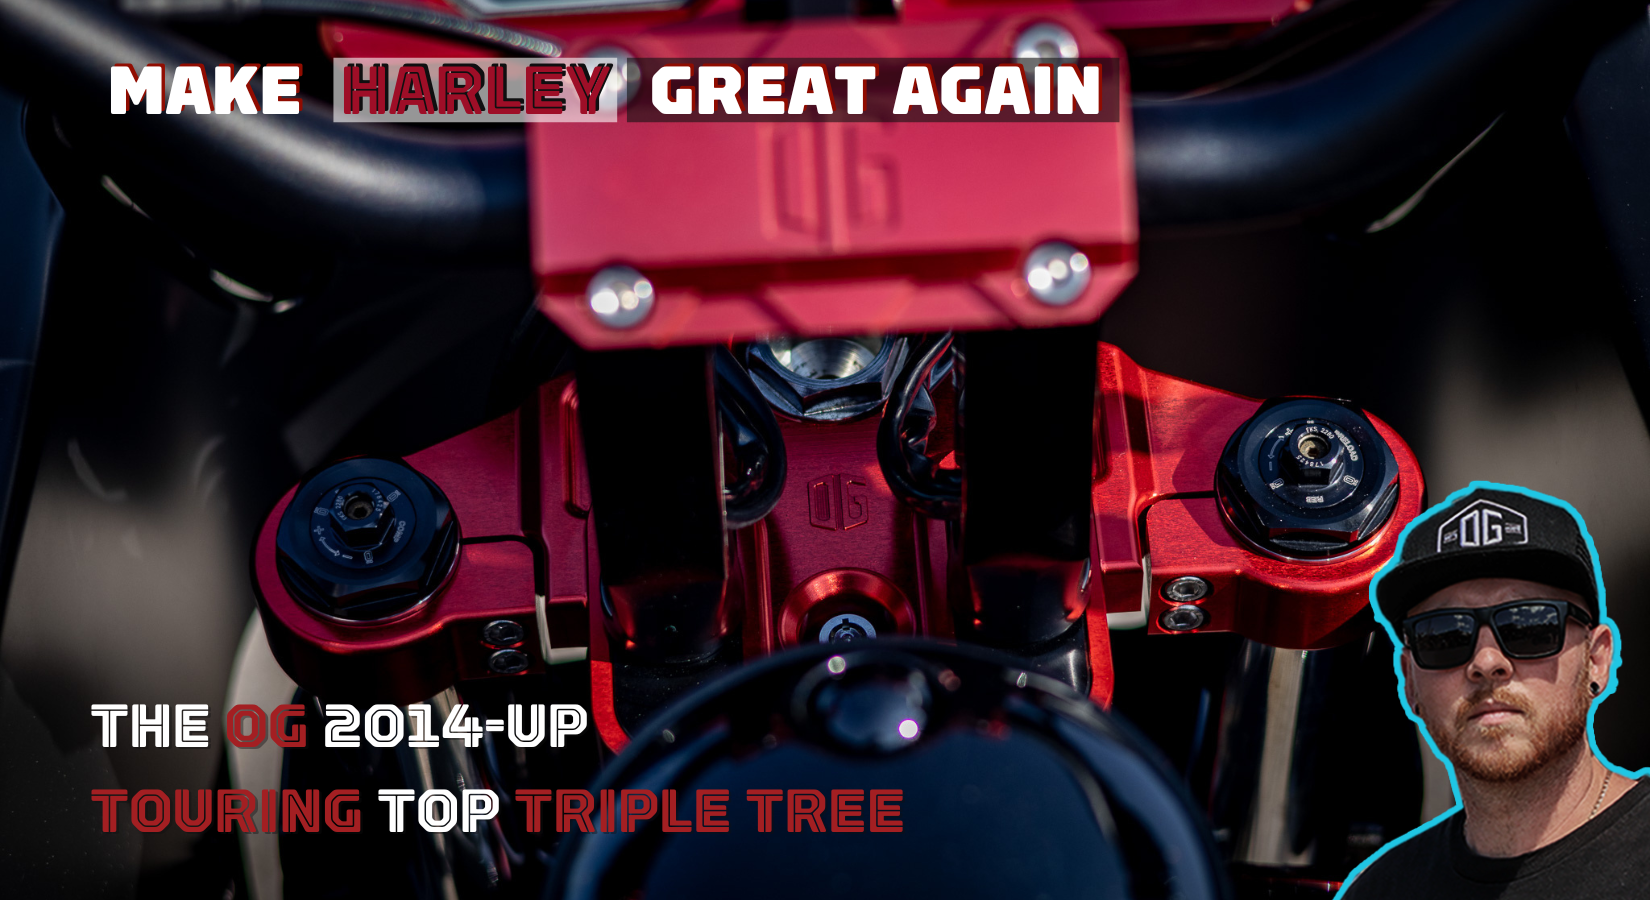 Get the most out of your Bagger Hand controls: The OG 2014-Up Touring Top Triple Tree